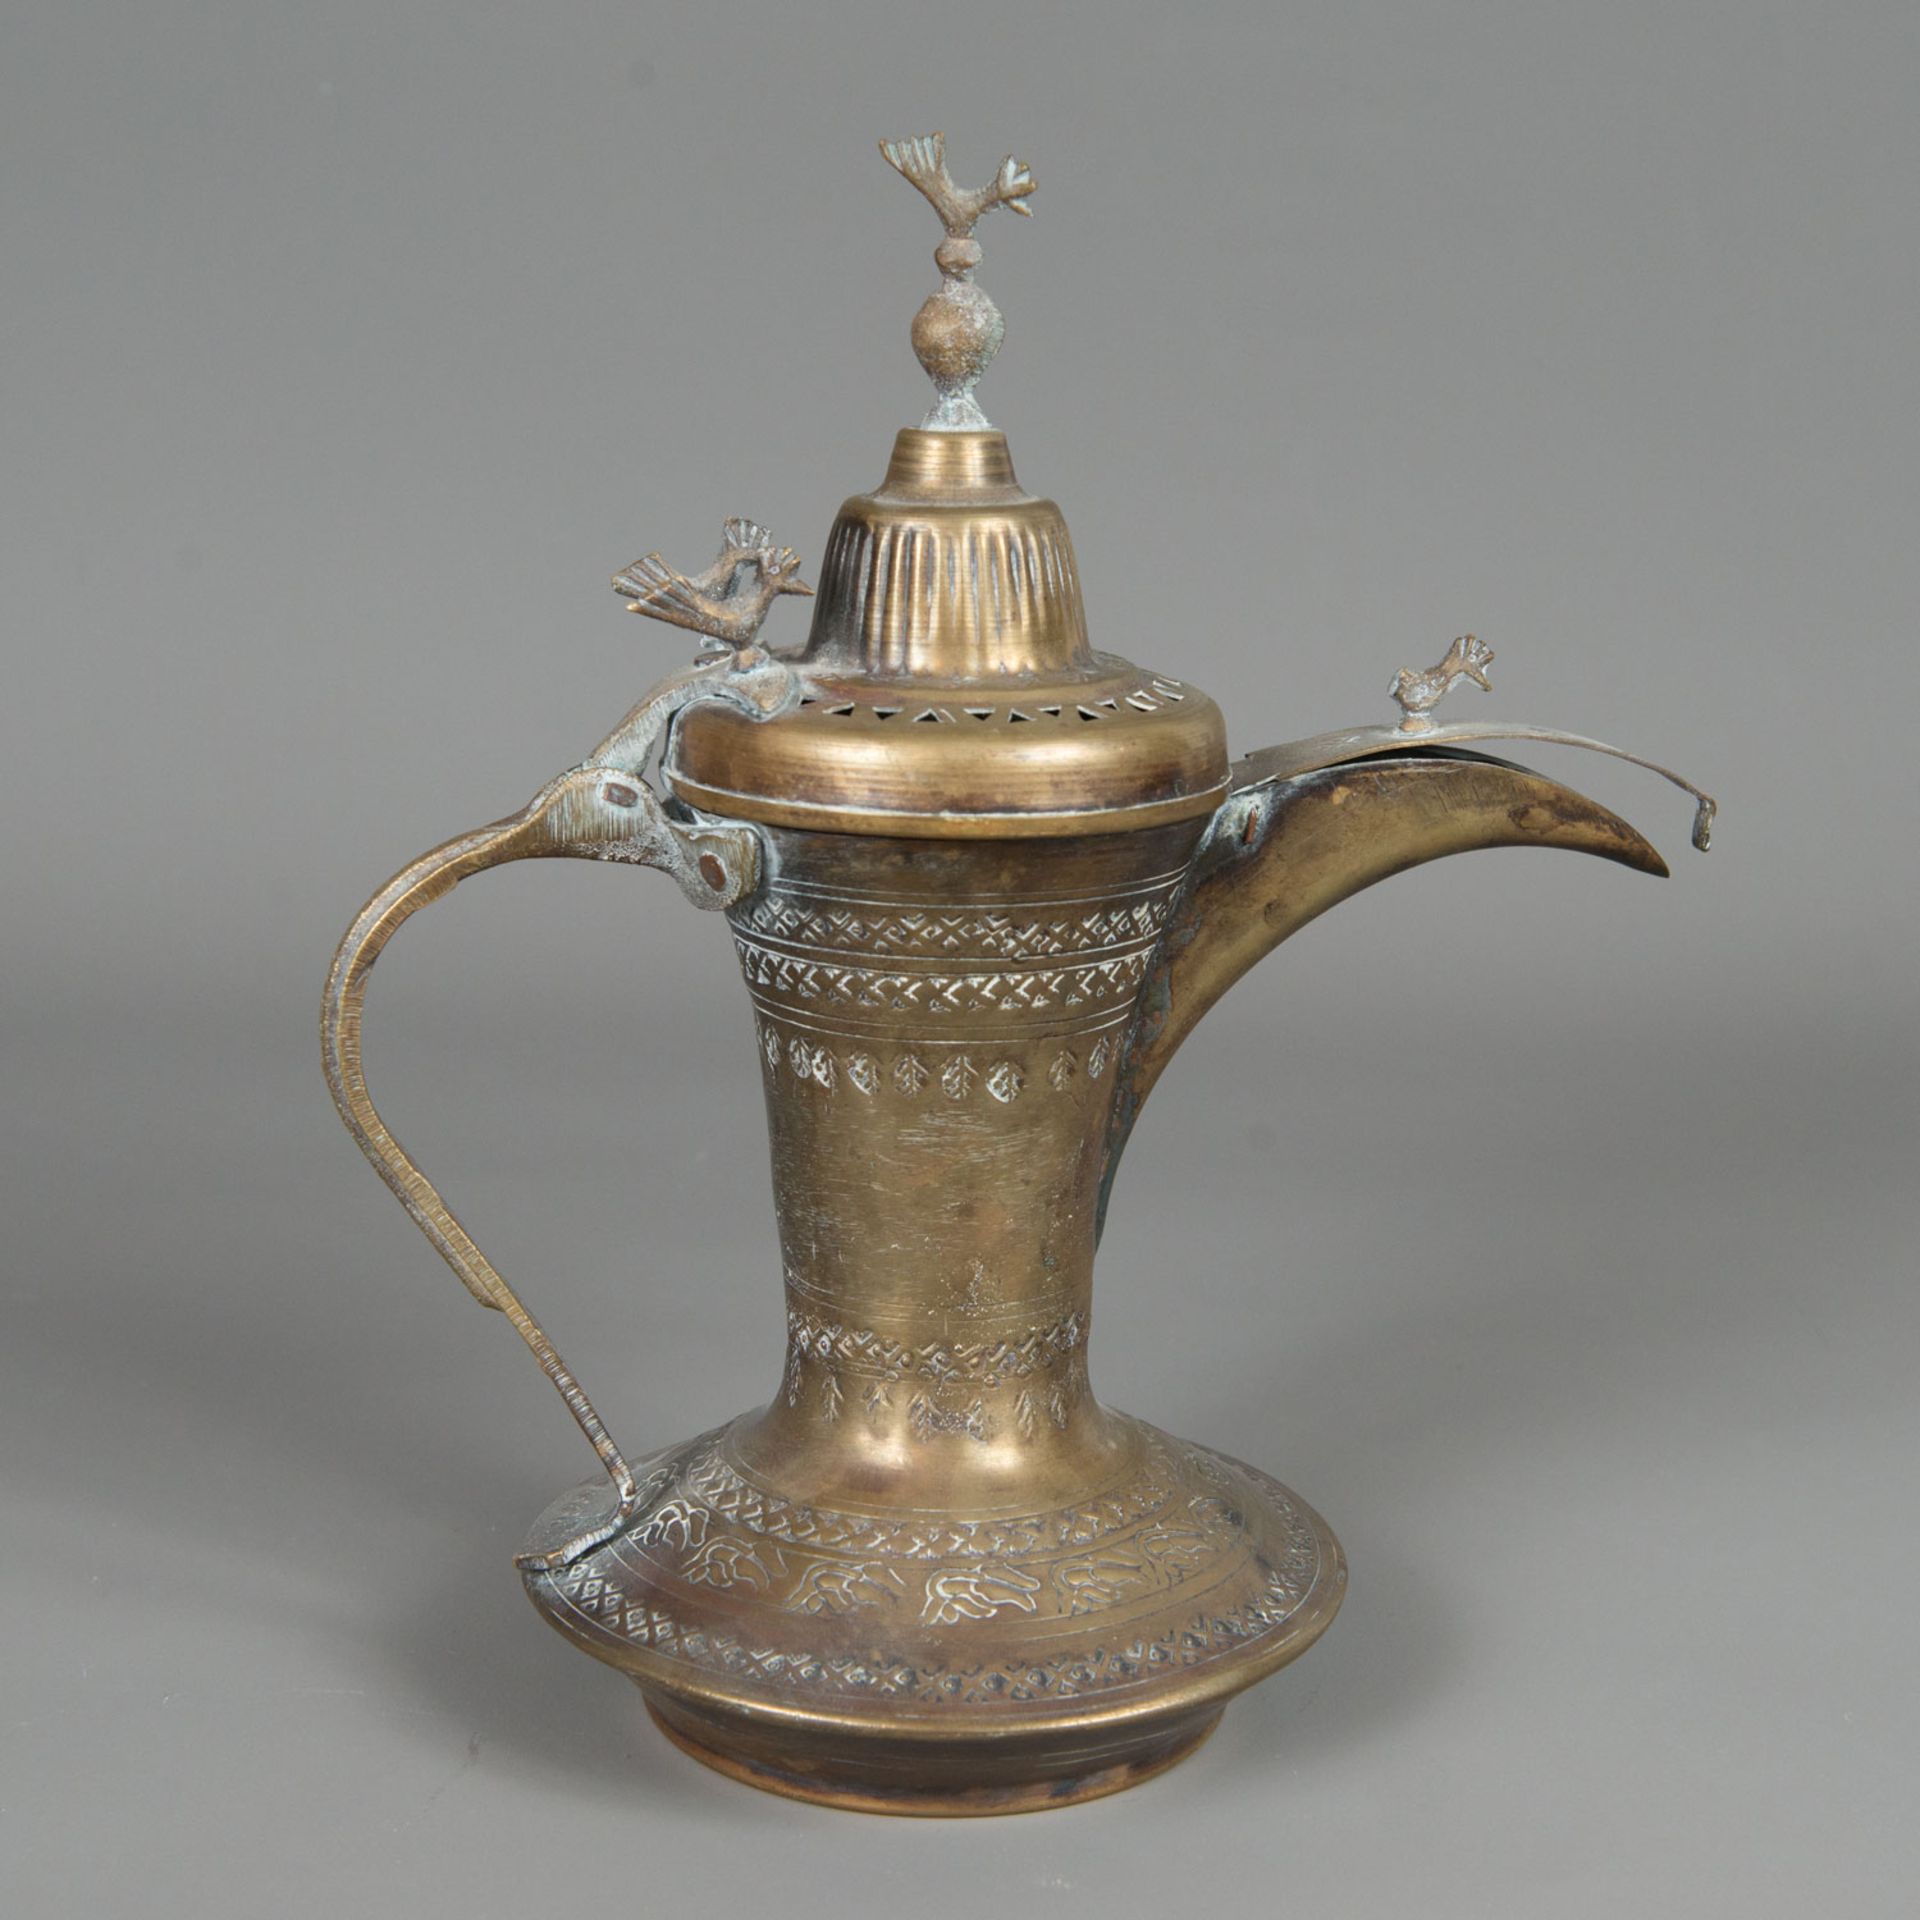 Syrian Coffee Pot - Image 2 of 3